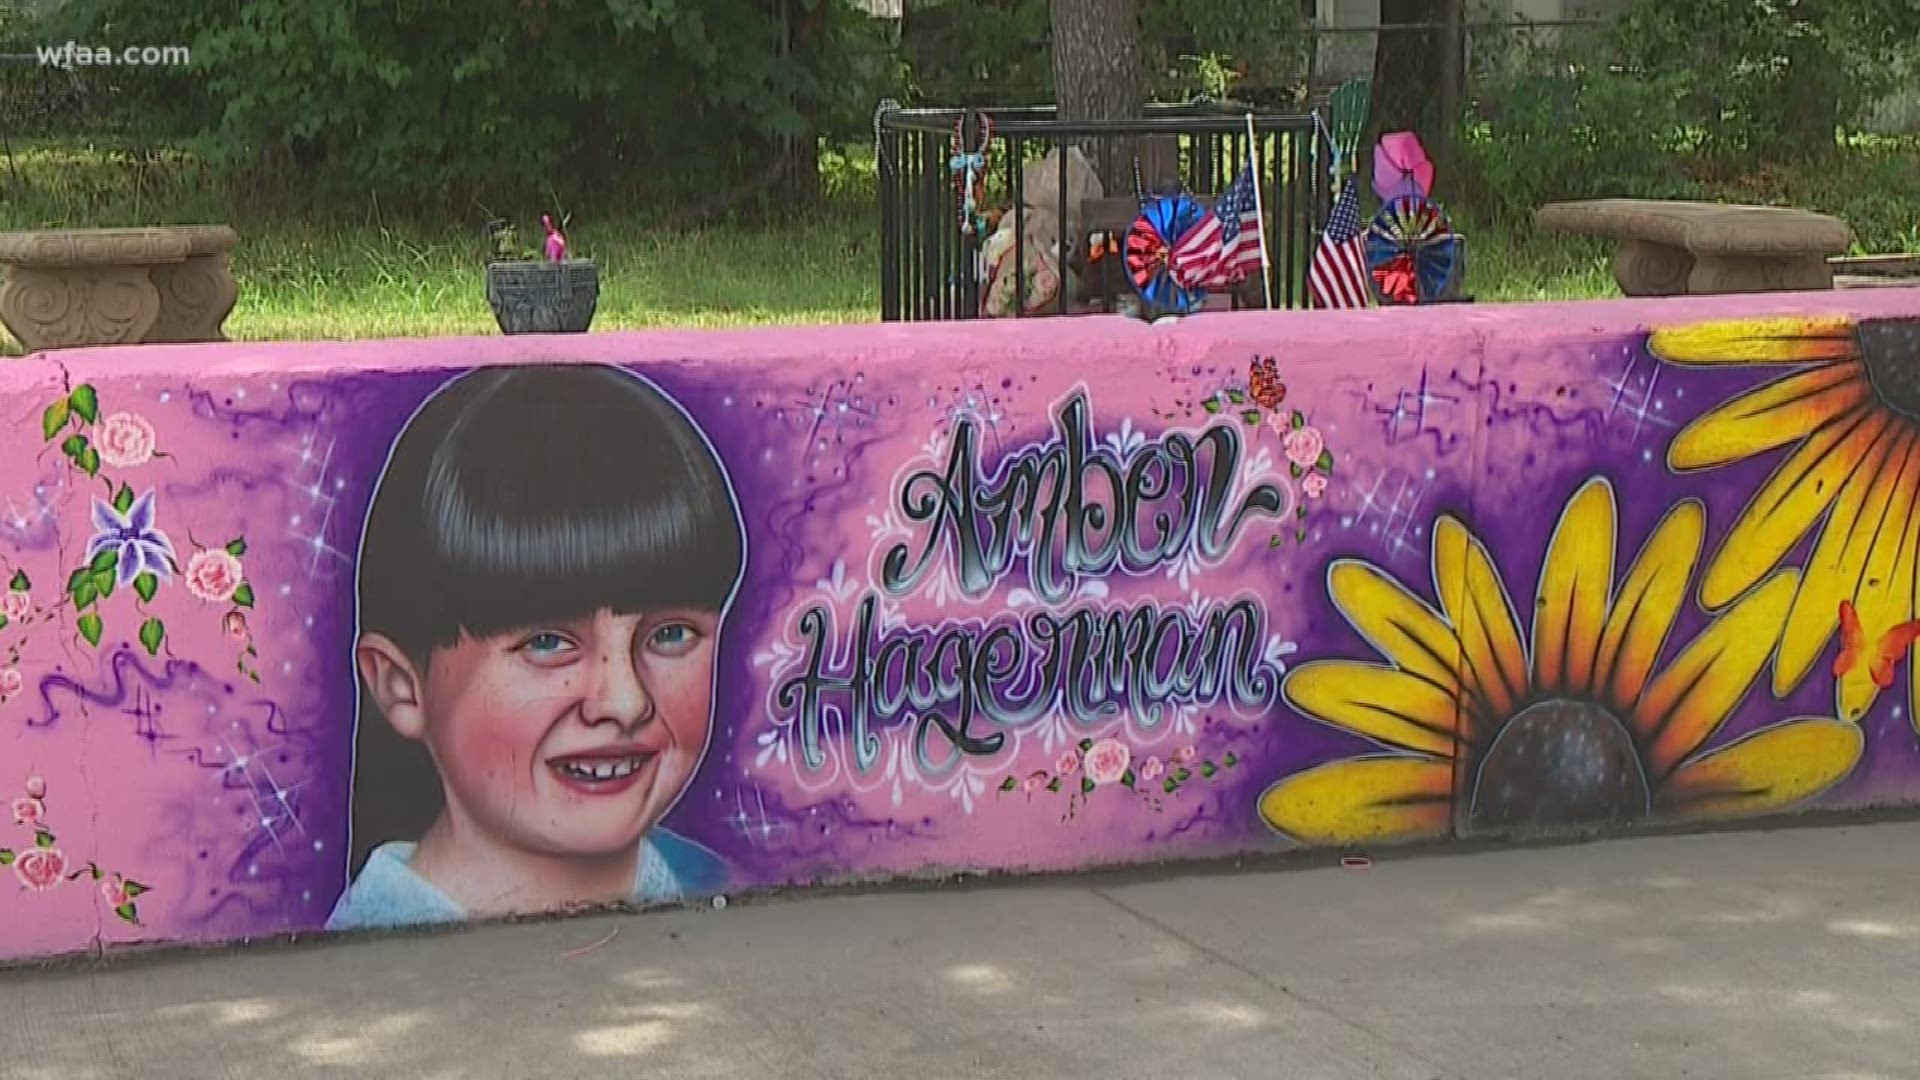 This weekend a group cleaned a small park in Arlington and finished a mural in honor of Hagerman.